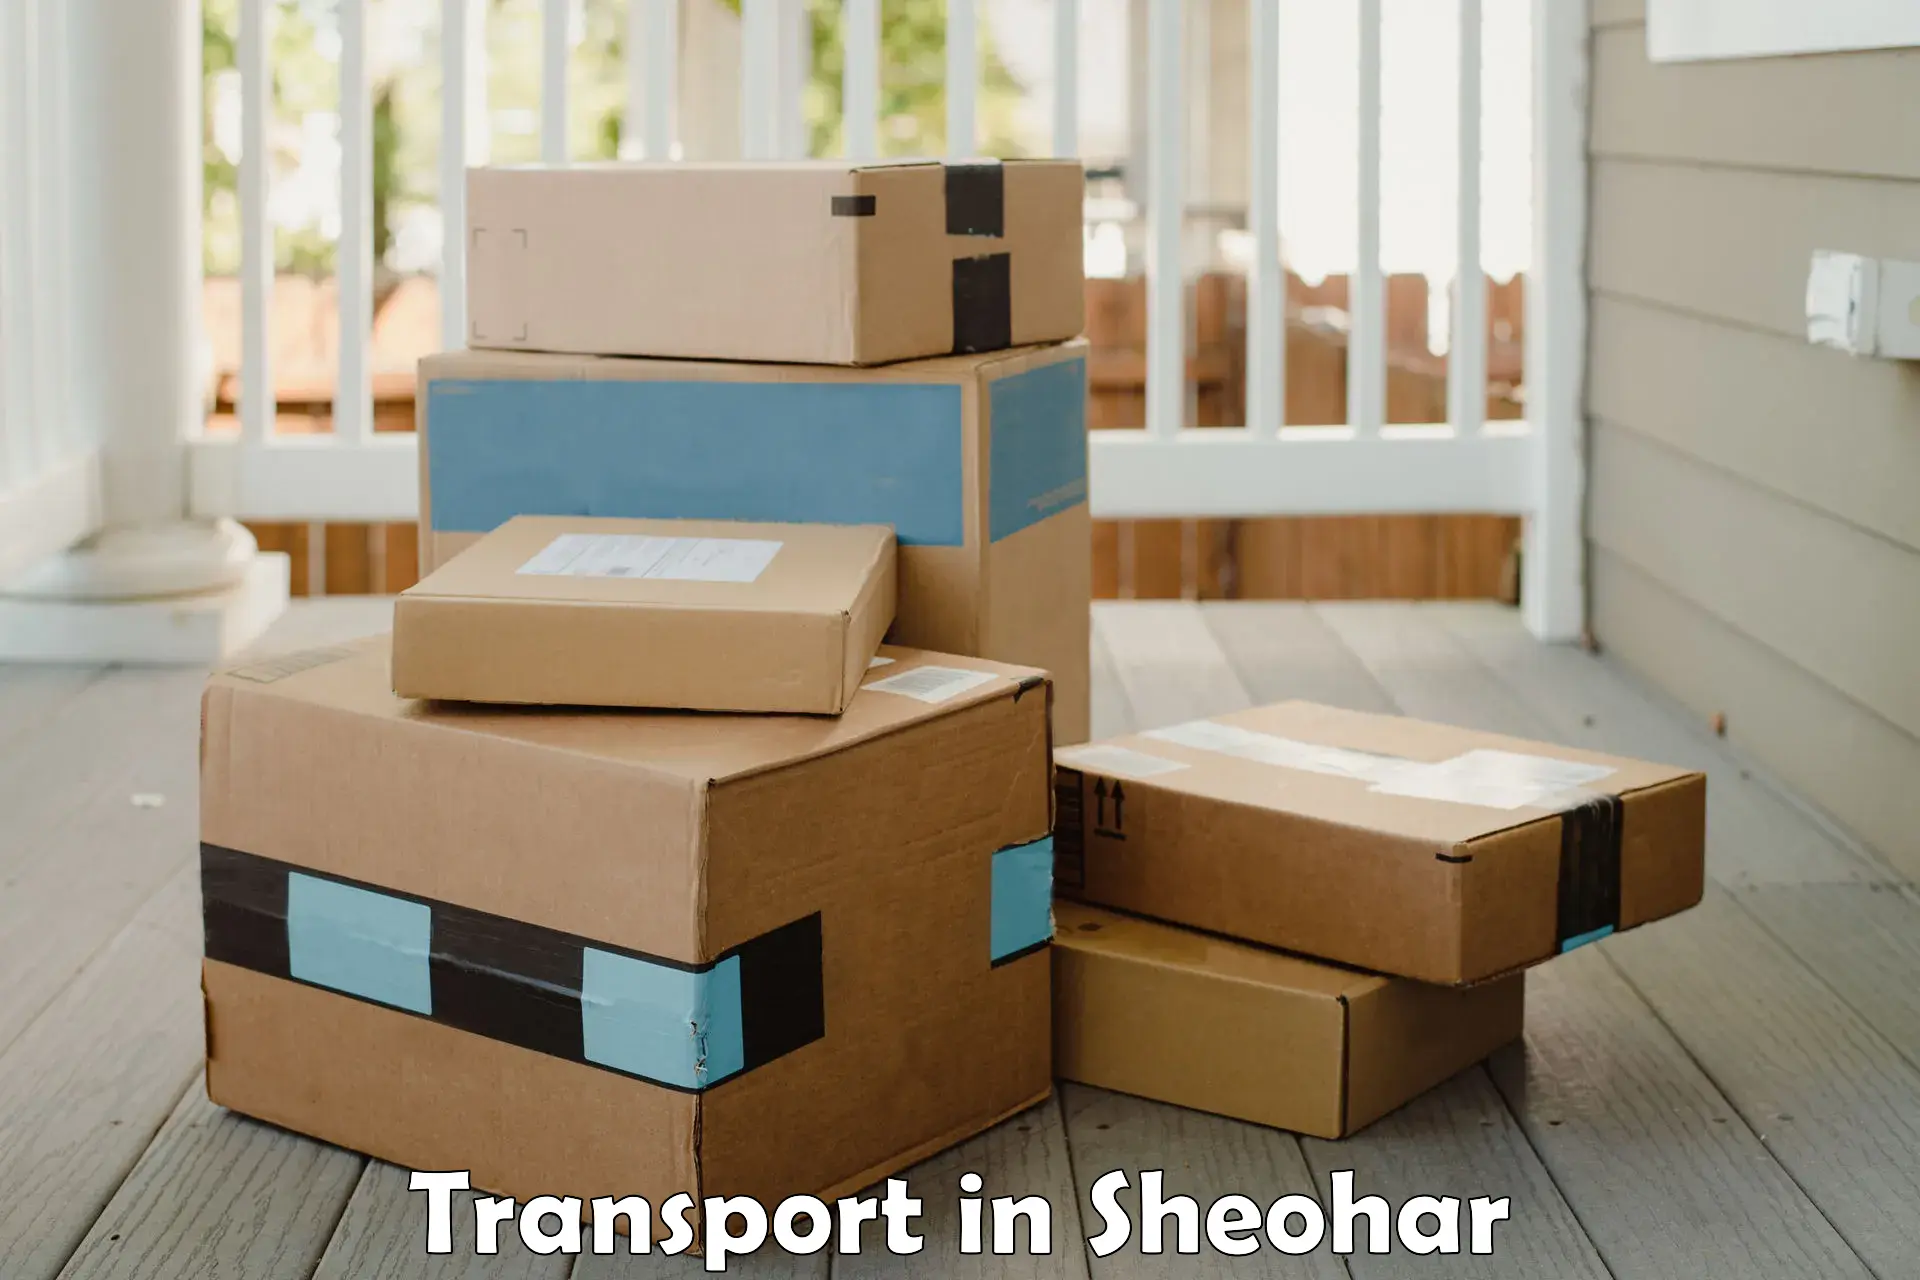 Container transport service in Sheohar